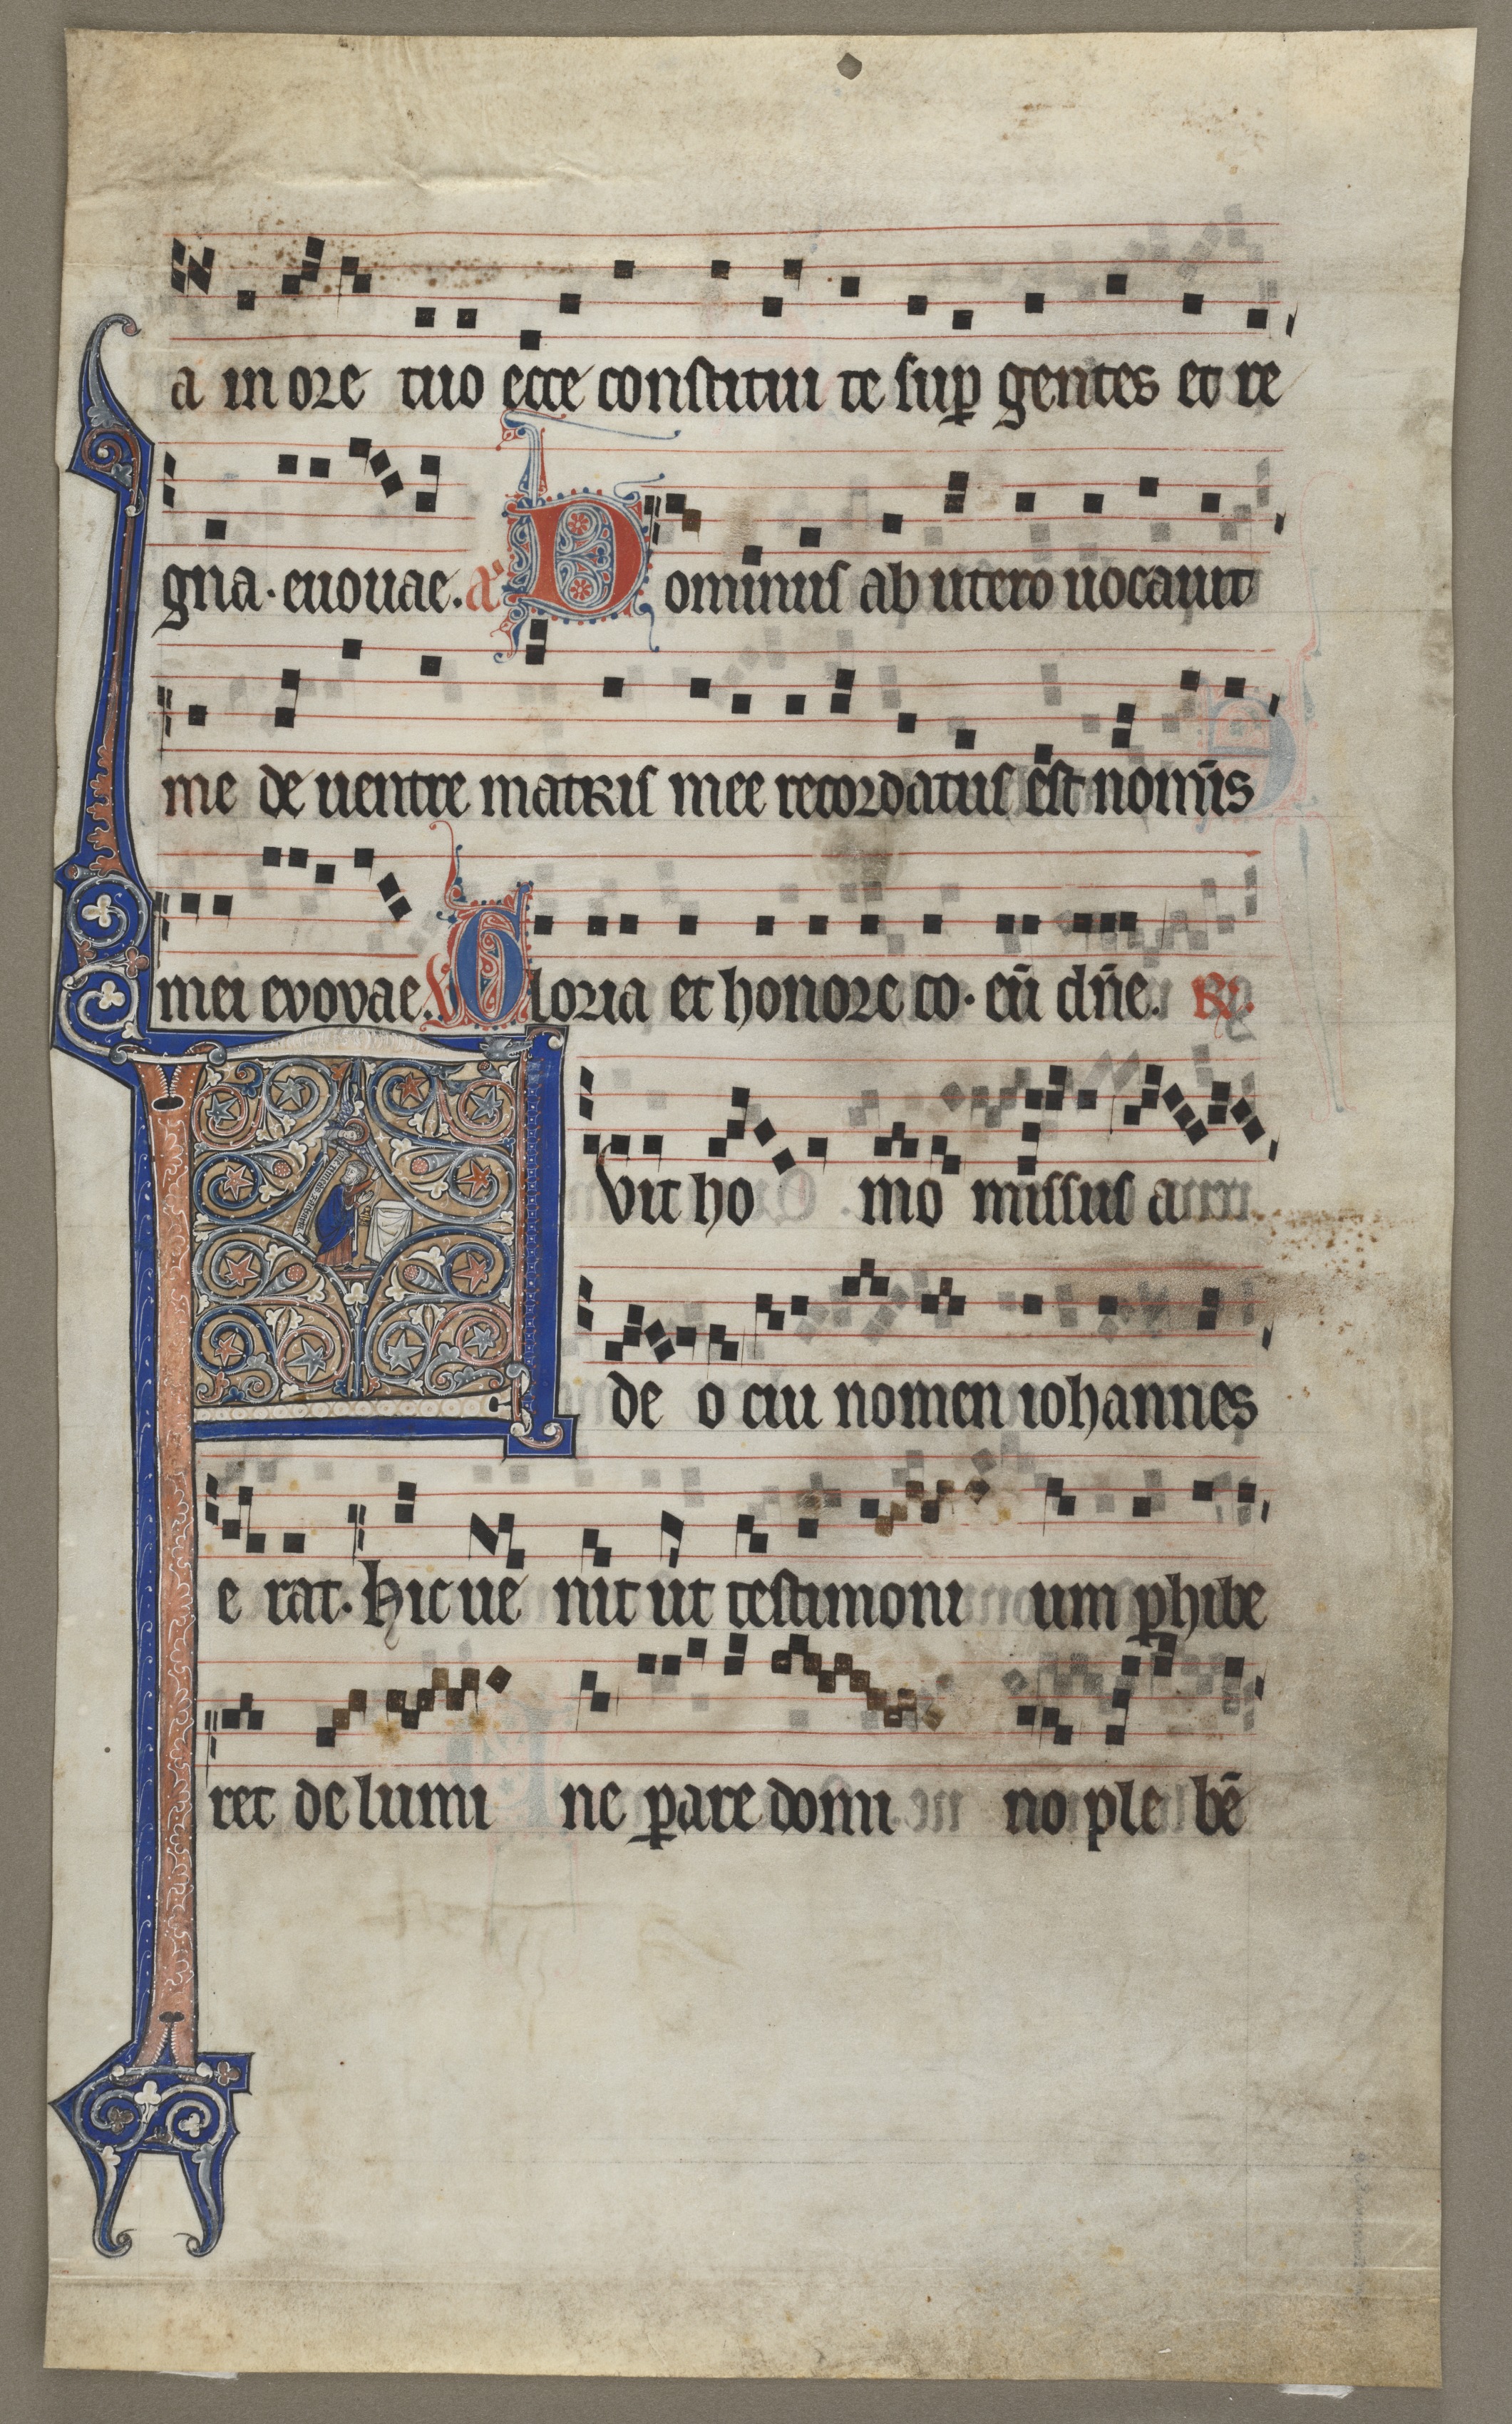 Leaf from a Choral Book: Annunciation to Zaccharias